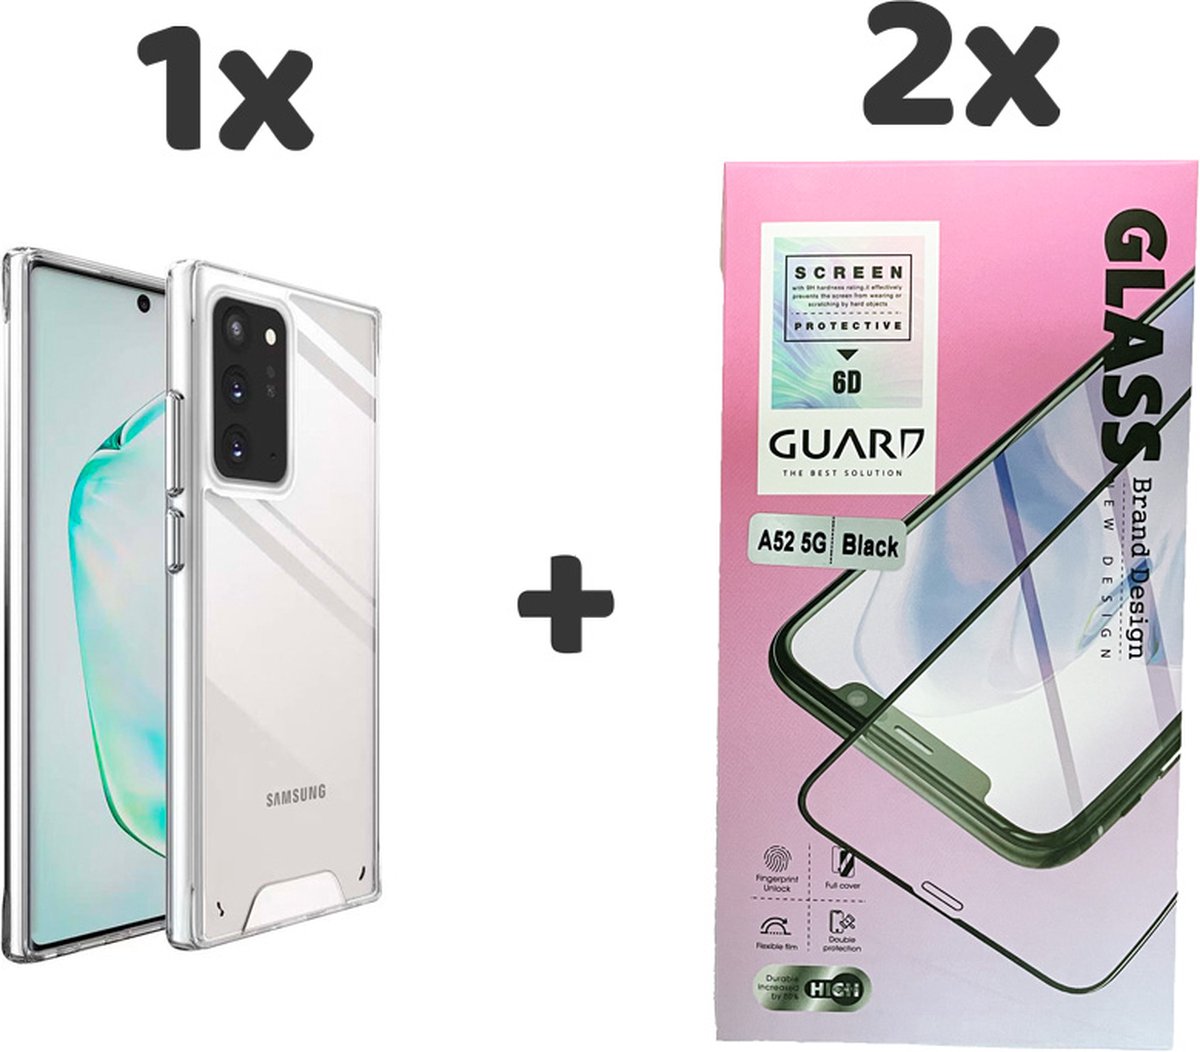 SPACE Samsung Galaxy A52-5G Transparant hoesje, Samsung Galaxy A52/A52s bumper hoesje, Samsung Galaxy A52-5G bumper case, Samsung Galaxy A52-5G Backcover hoesje